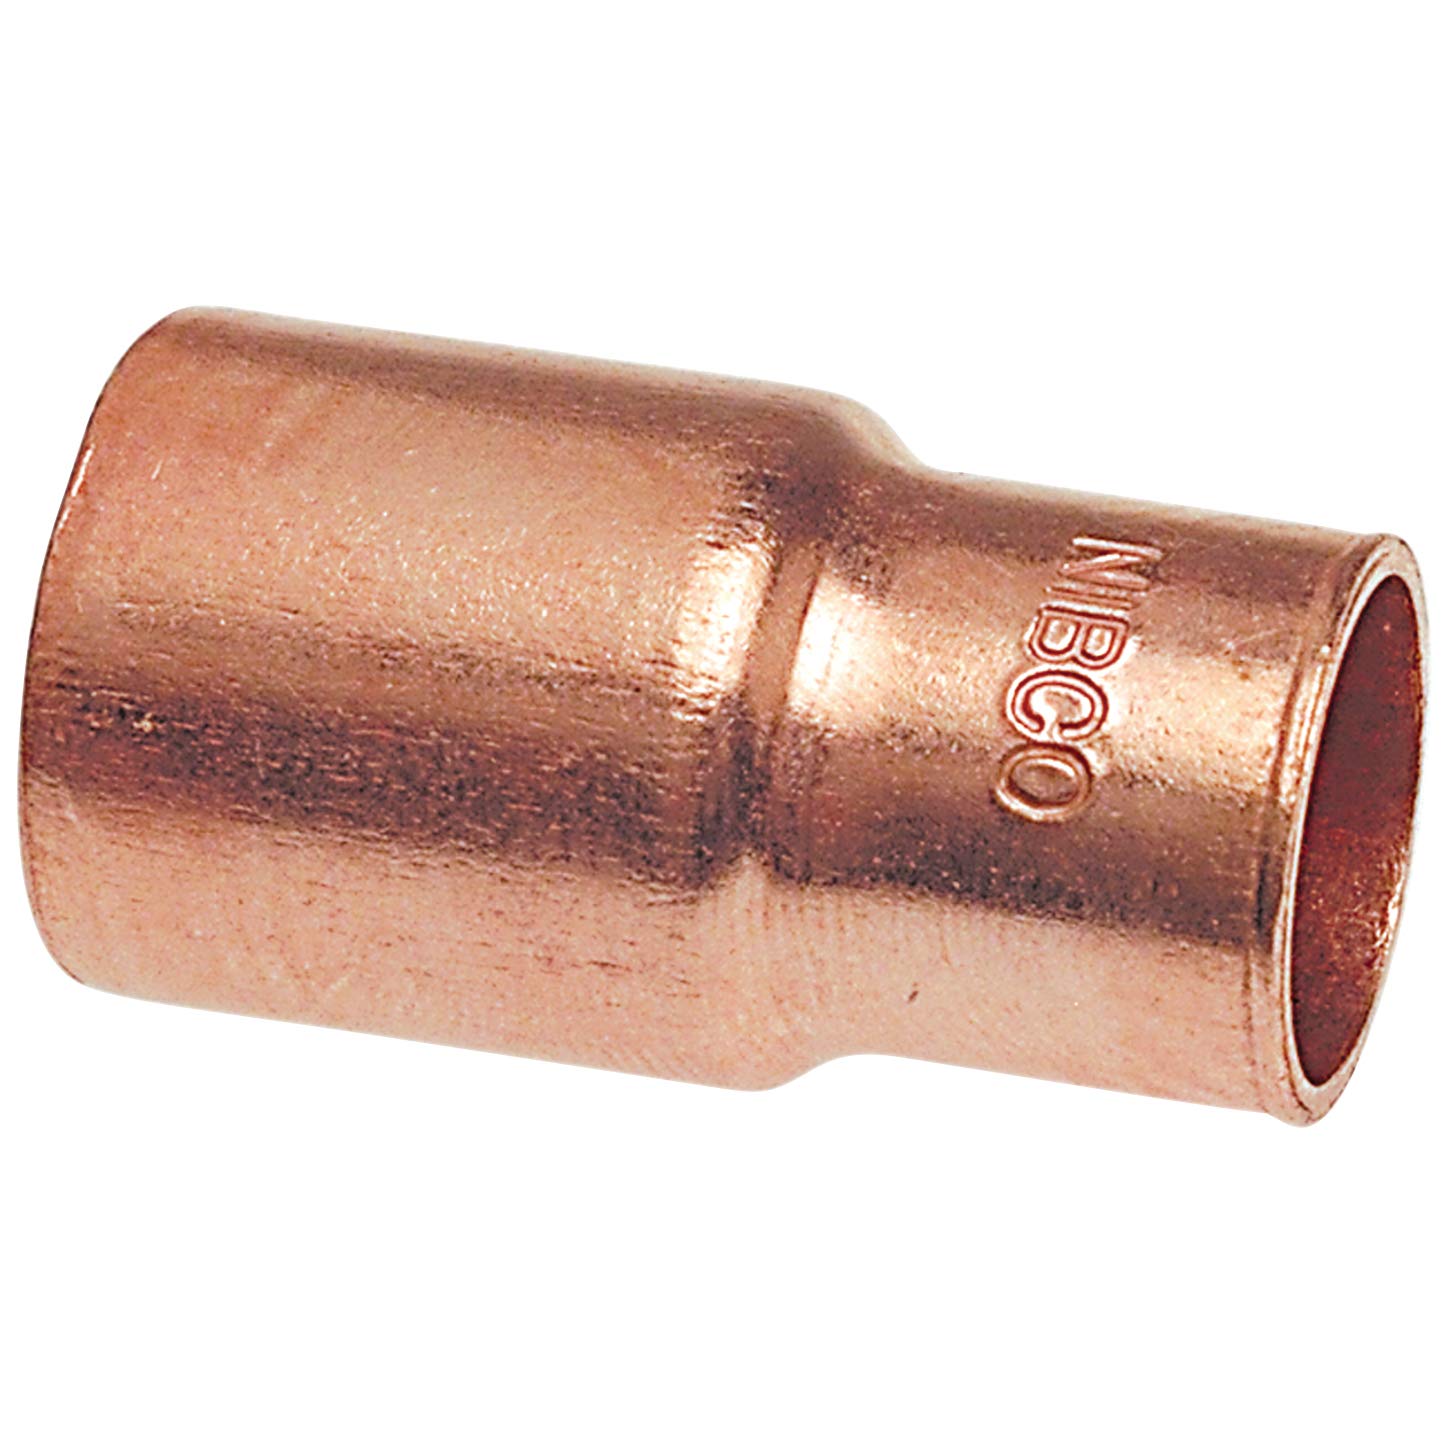 1-1/2" x 1/2" Fitting Reducer Ftg x C - Wrot Copper, 600-2